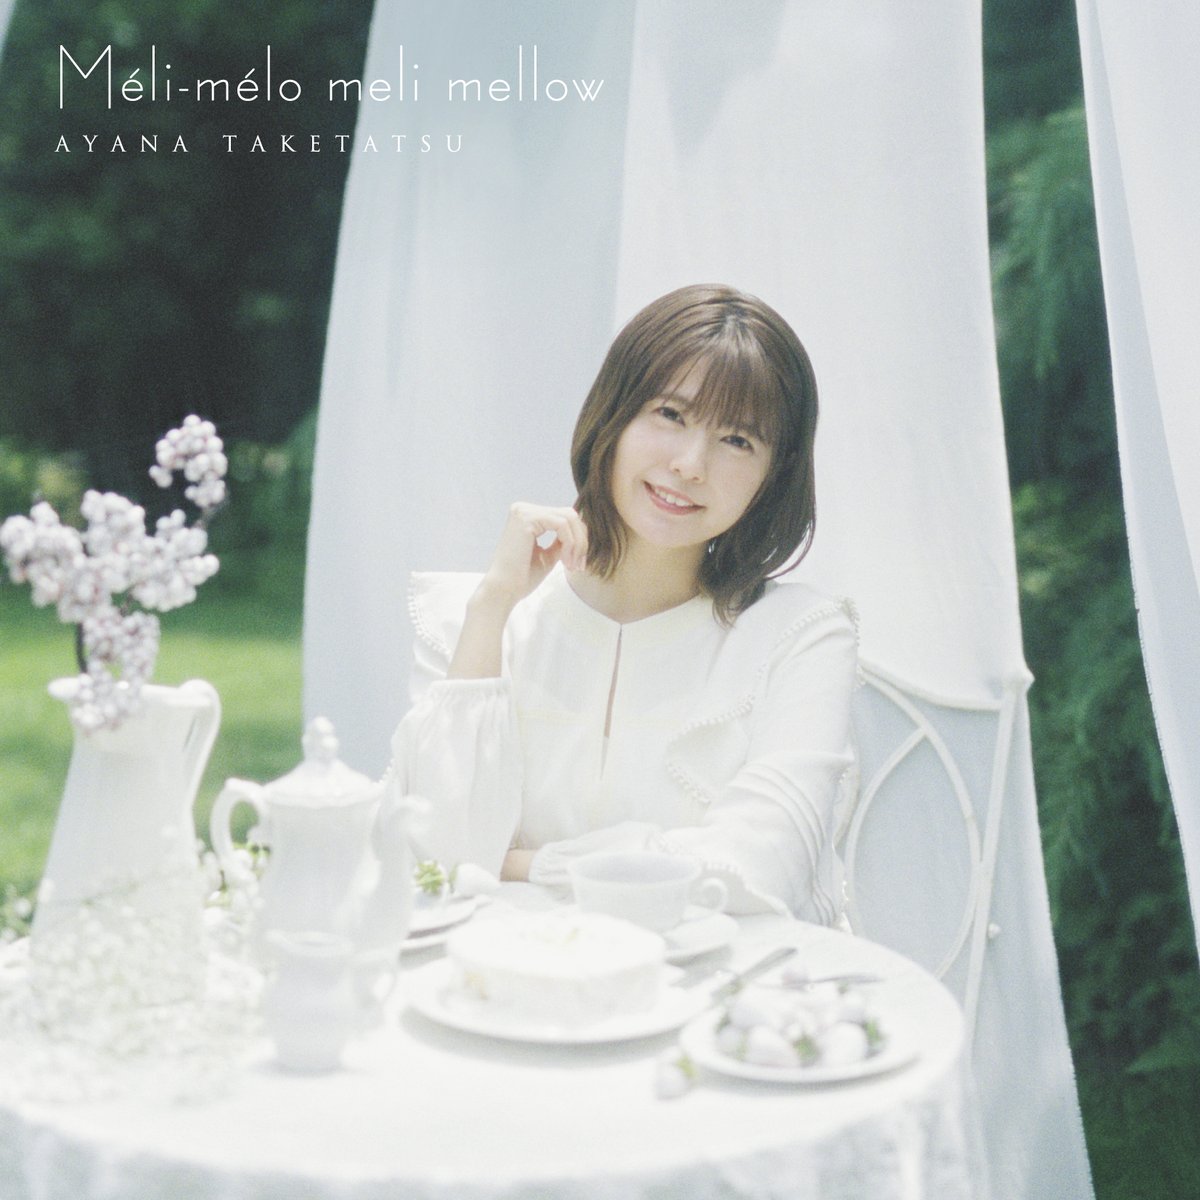 Cover art for『Ayana Taketatsu - 世界が一瞬だけ恋をするような時間』from the release『Méli-mélo meli mellow